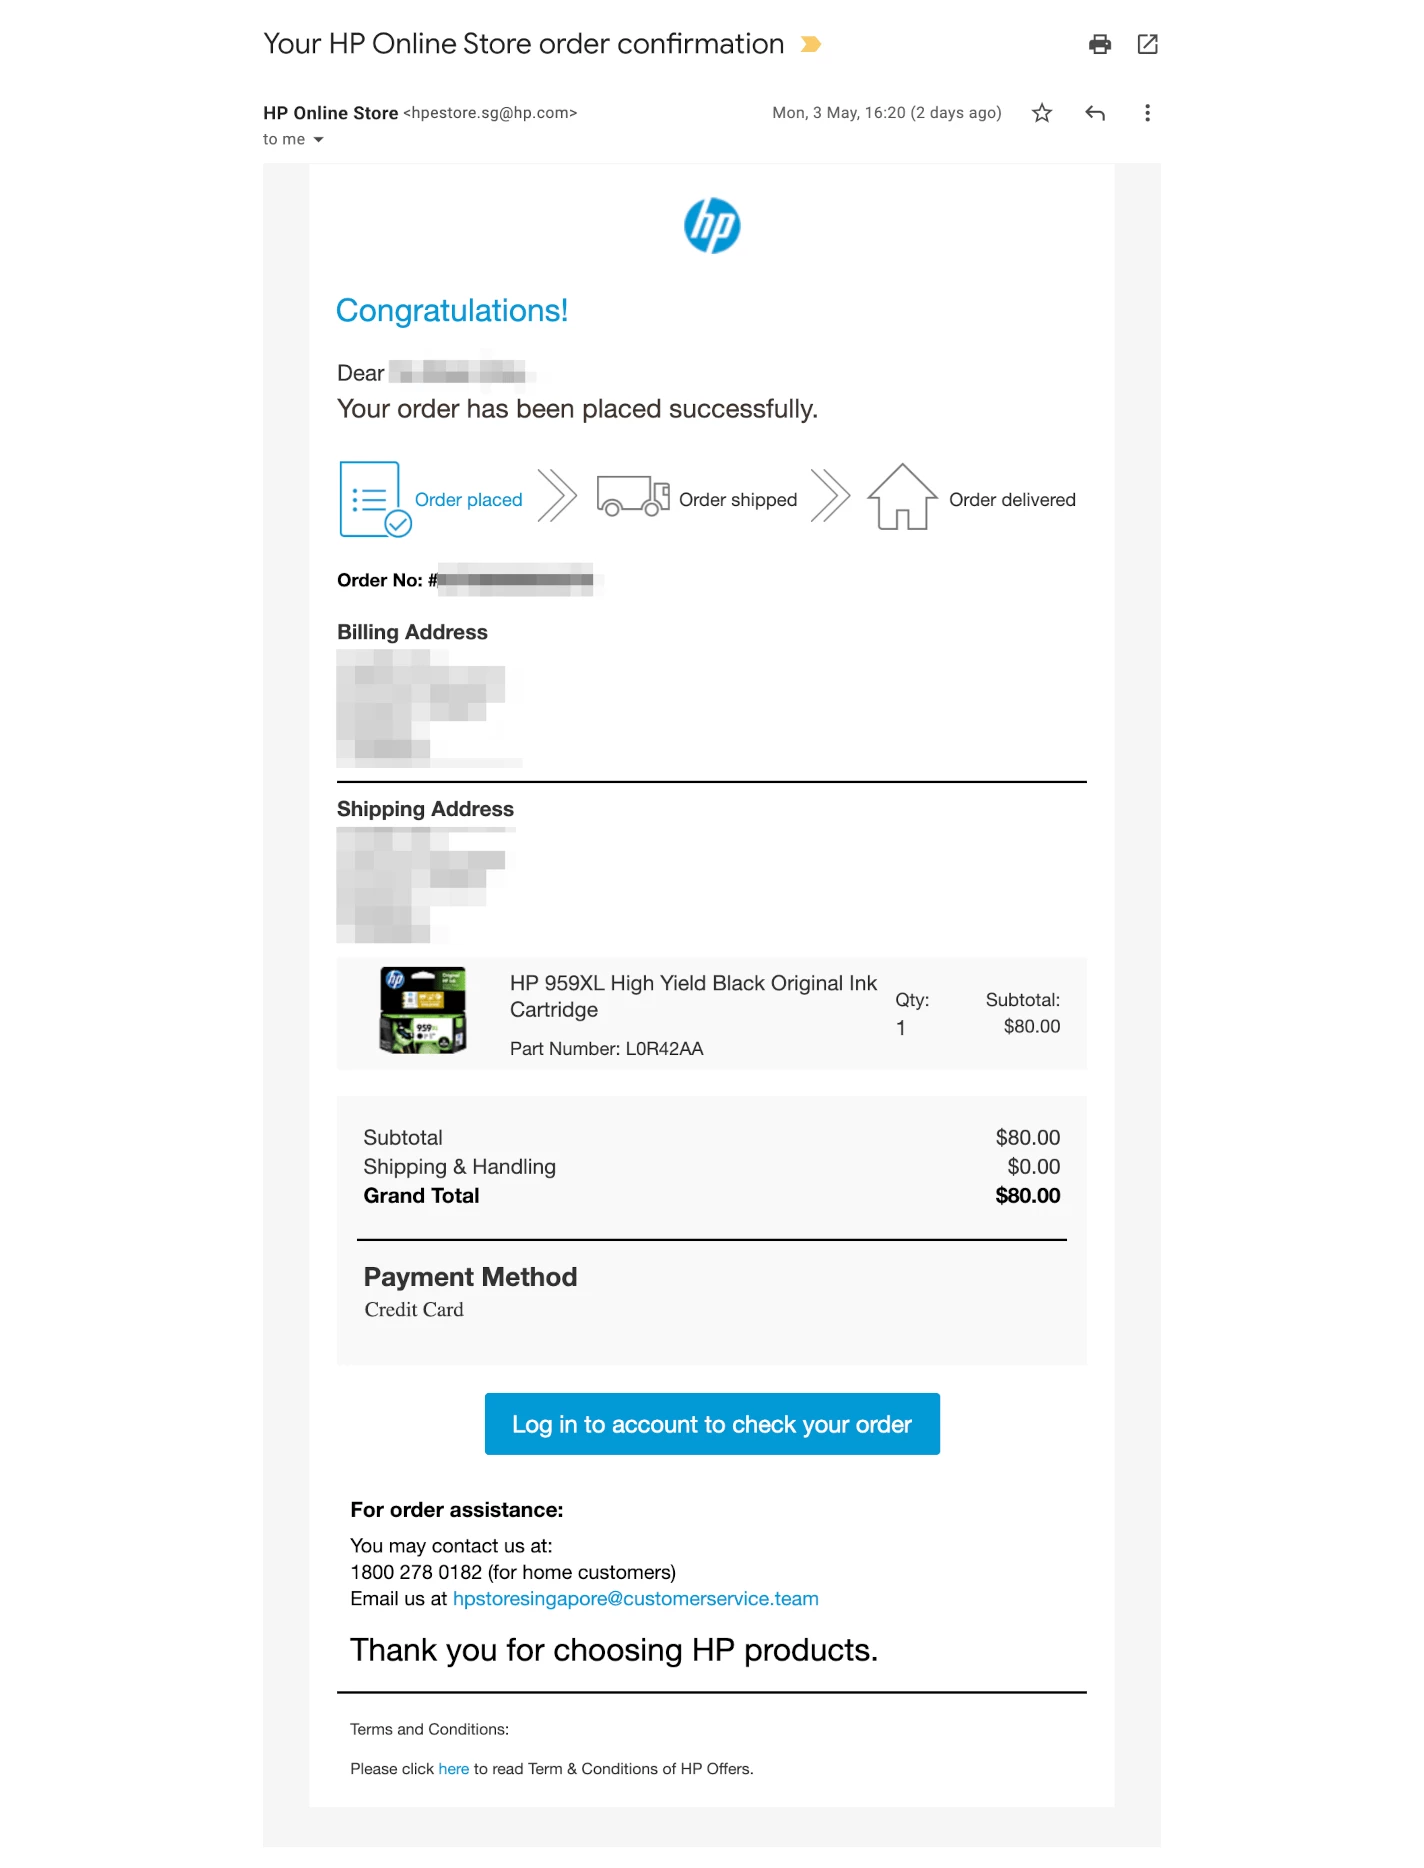 HP order confirmation email